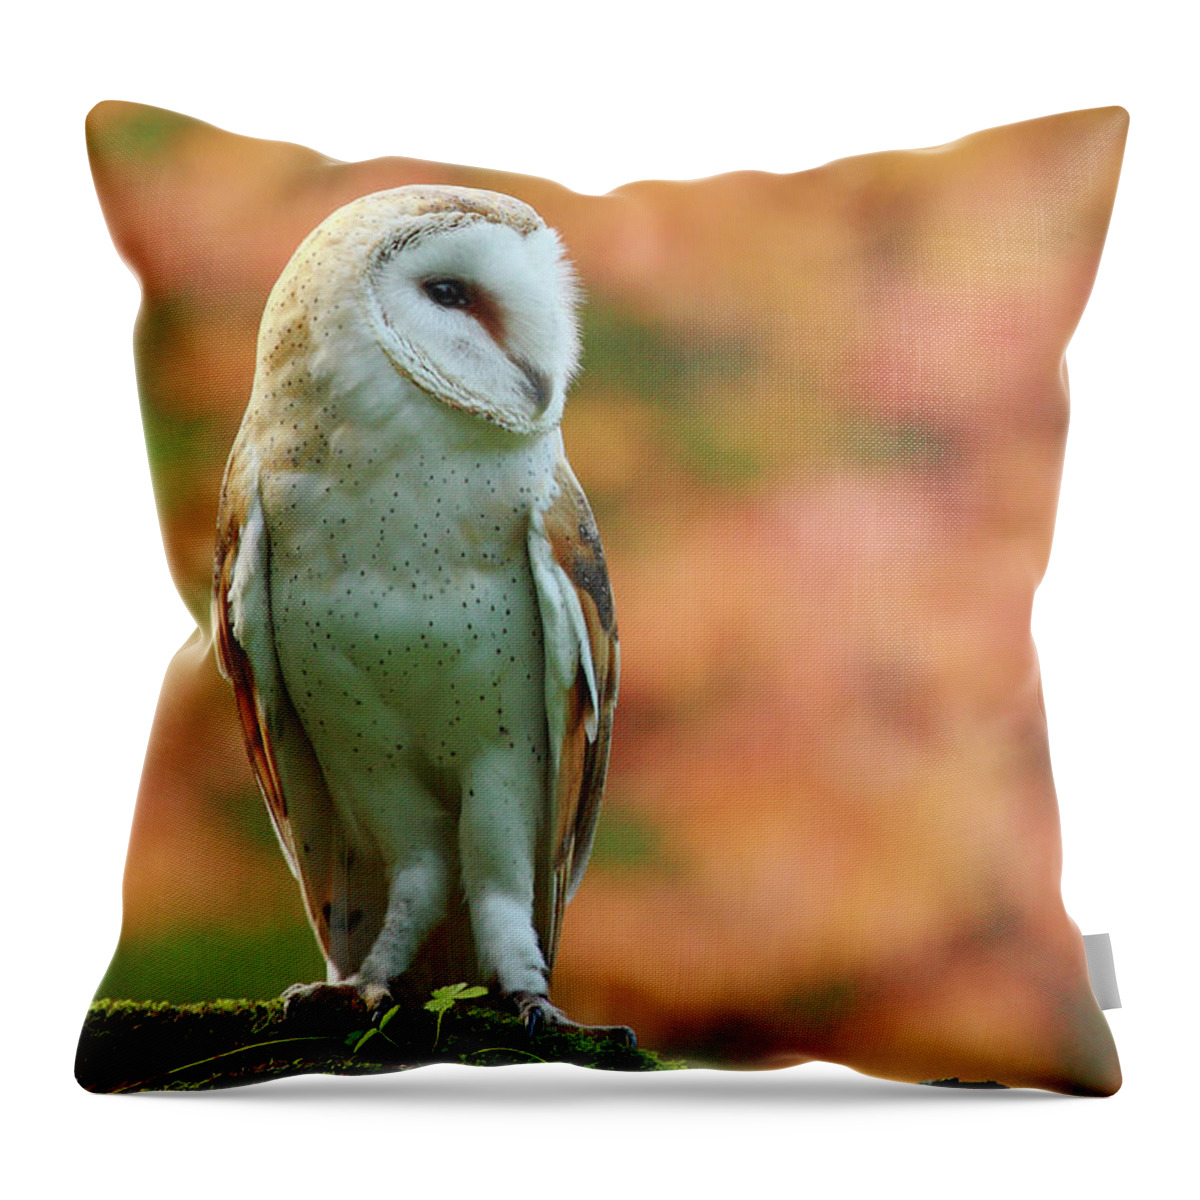 Animal Themes Throw Pillow featuring the photograph Barn Owl On Orange by Alex Thomson Photography